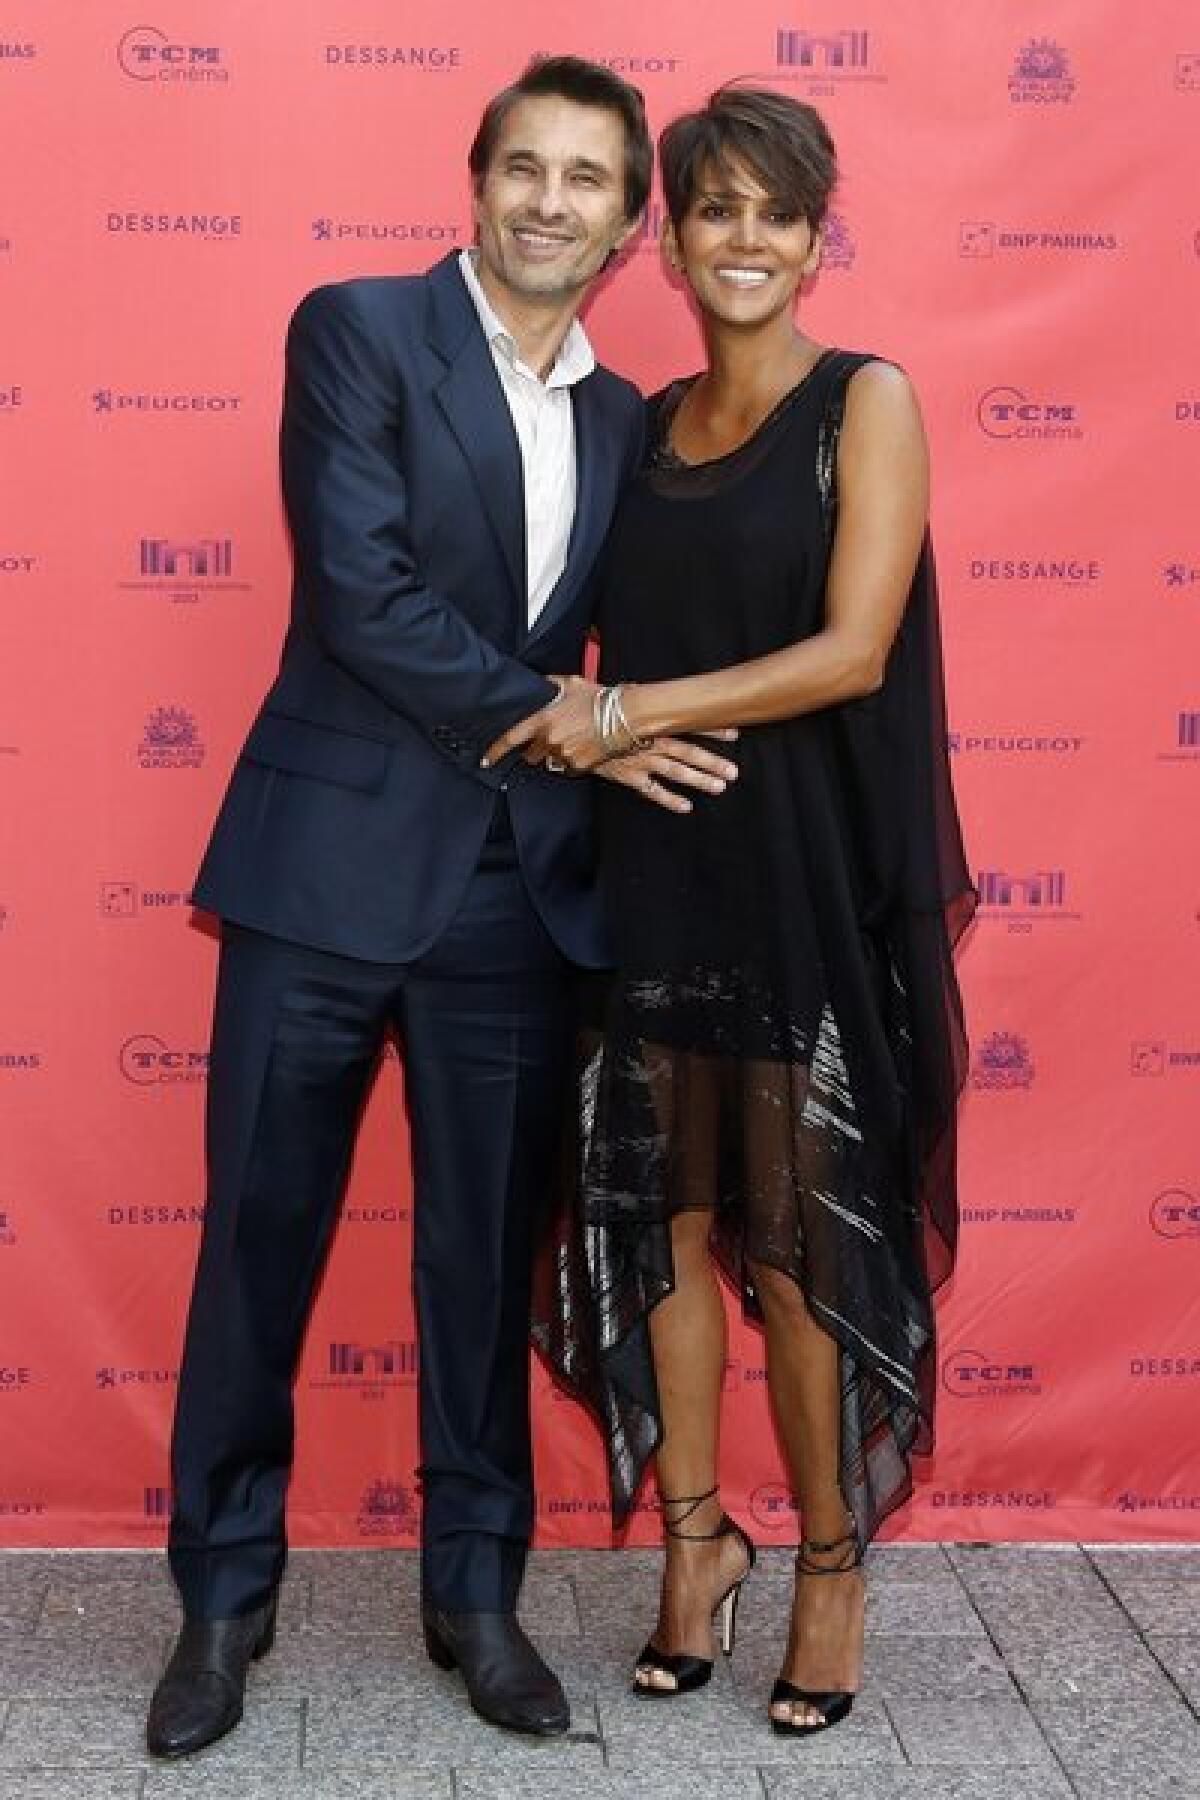 Olivier Martinez and Halle Berry at the Champs Elysees Film Festival in Paris.